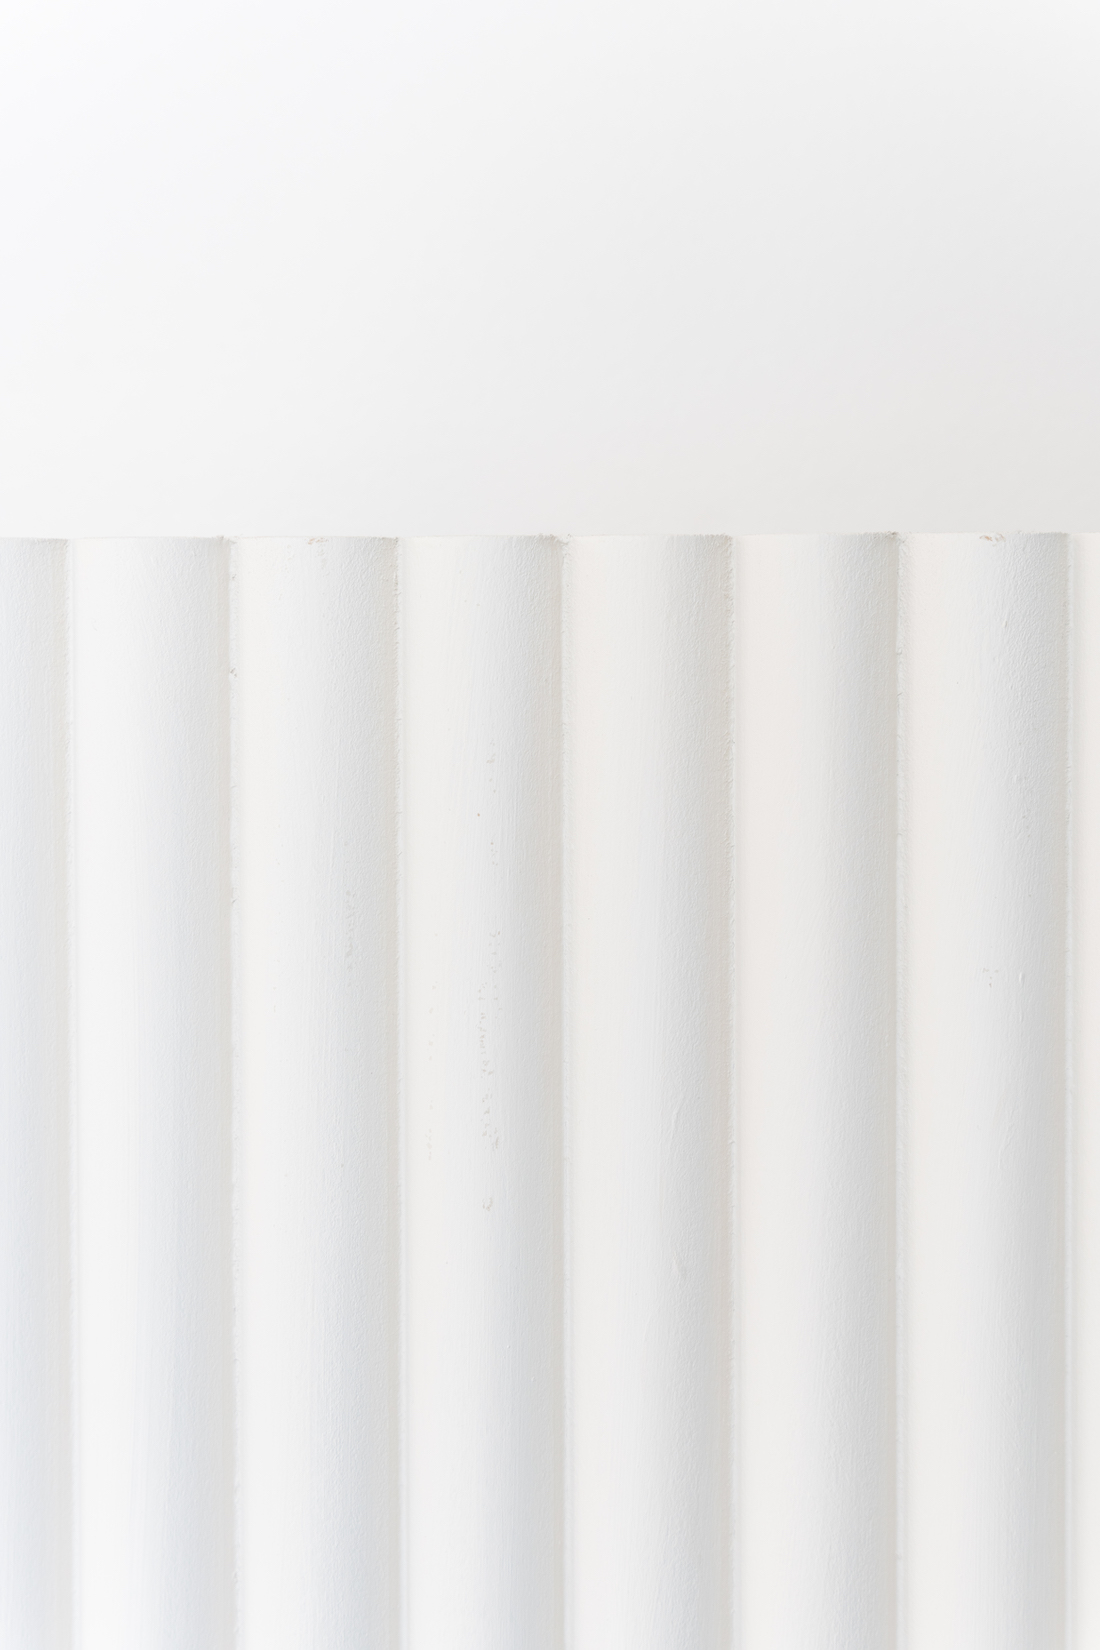 white fluted wall ledge